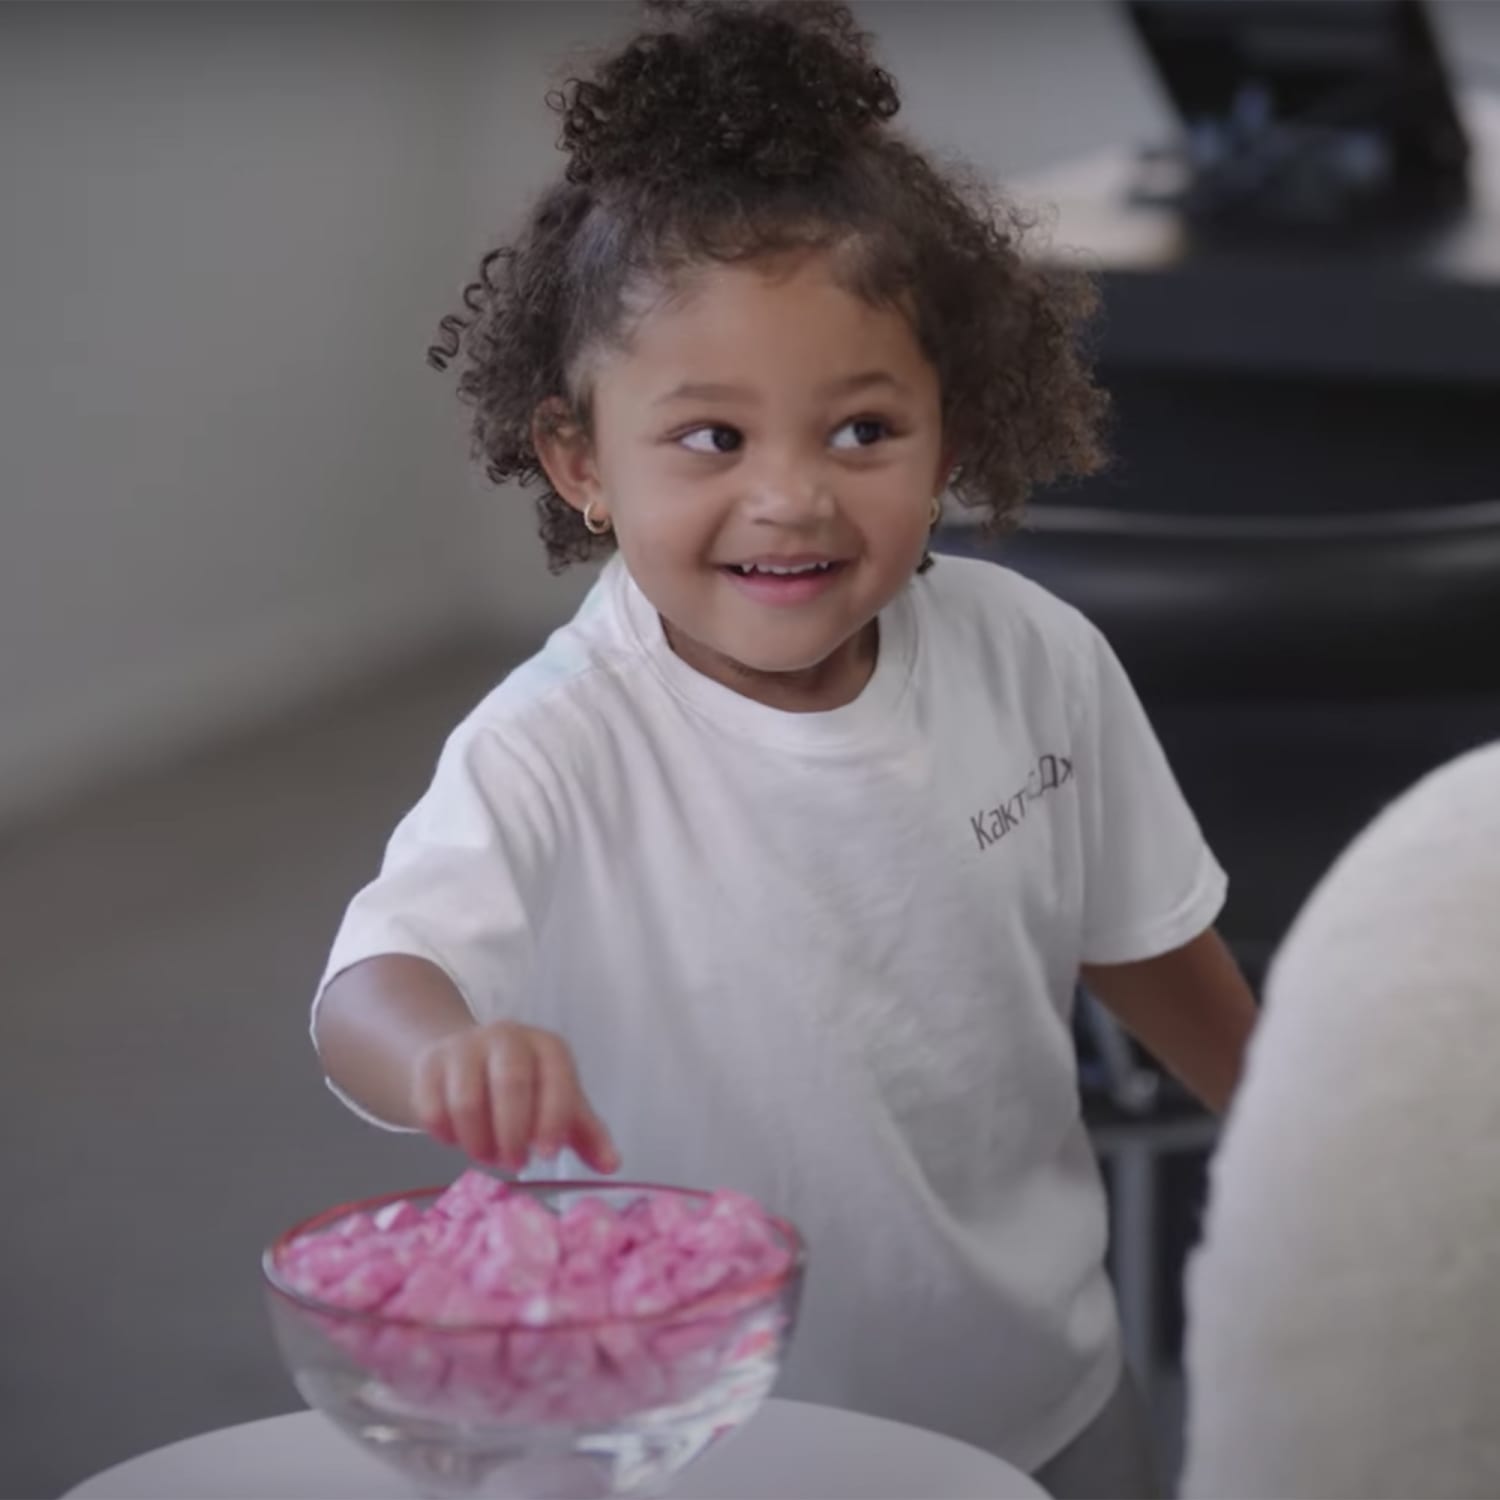 Kylie Jenner's Daughter Stormi Tries Her Lipstick in Funny Video